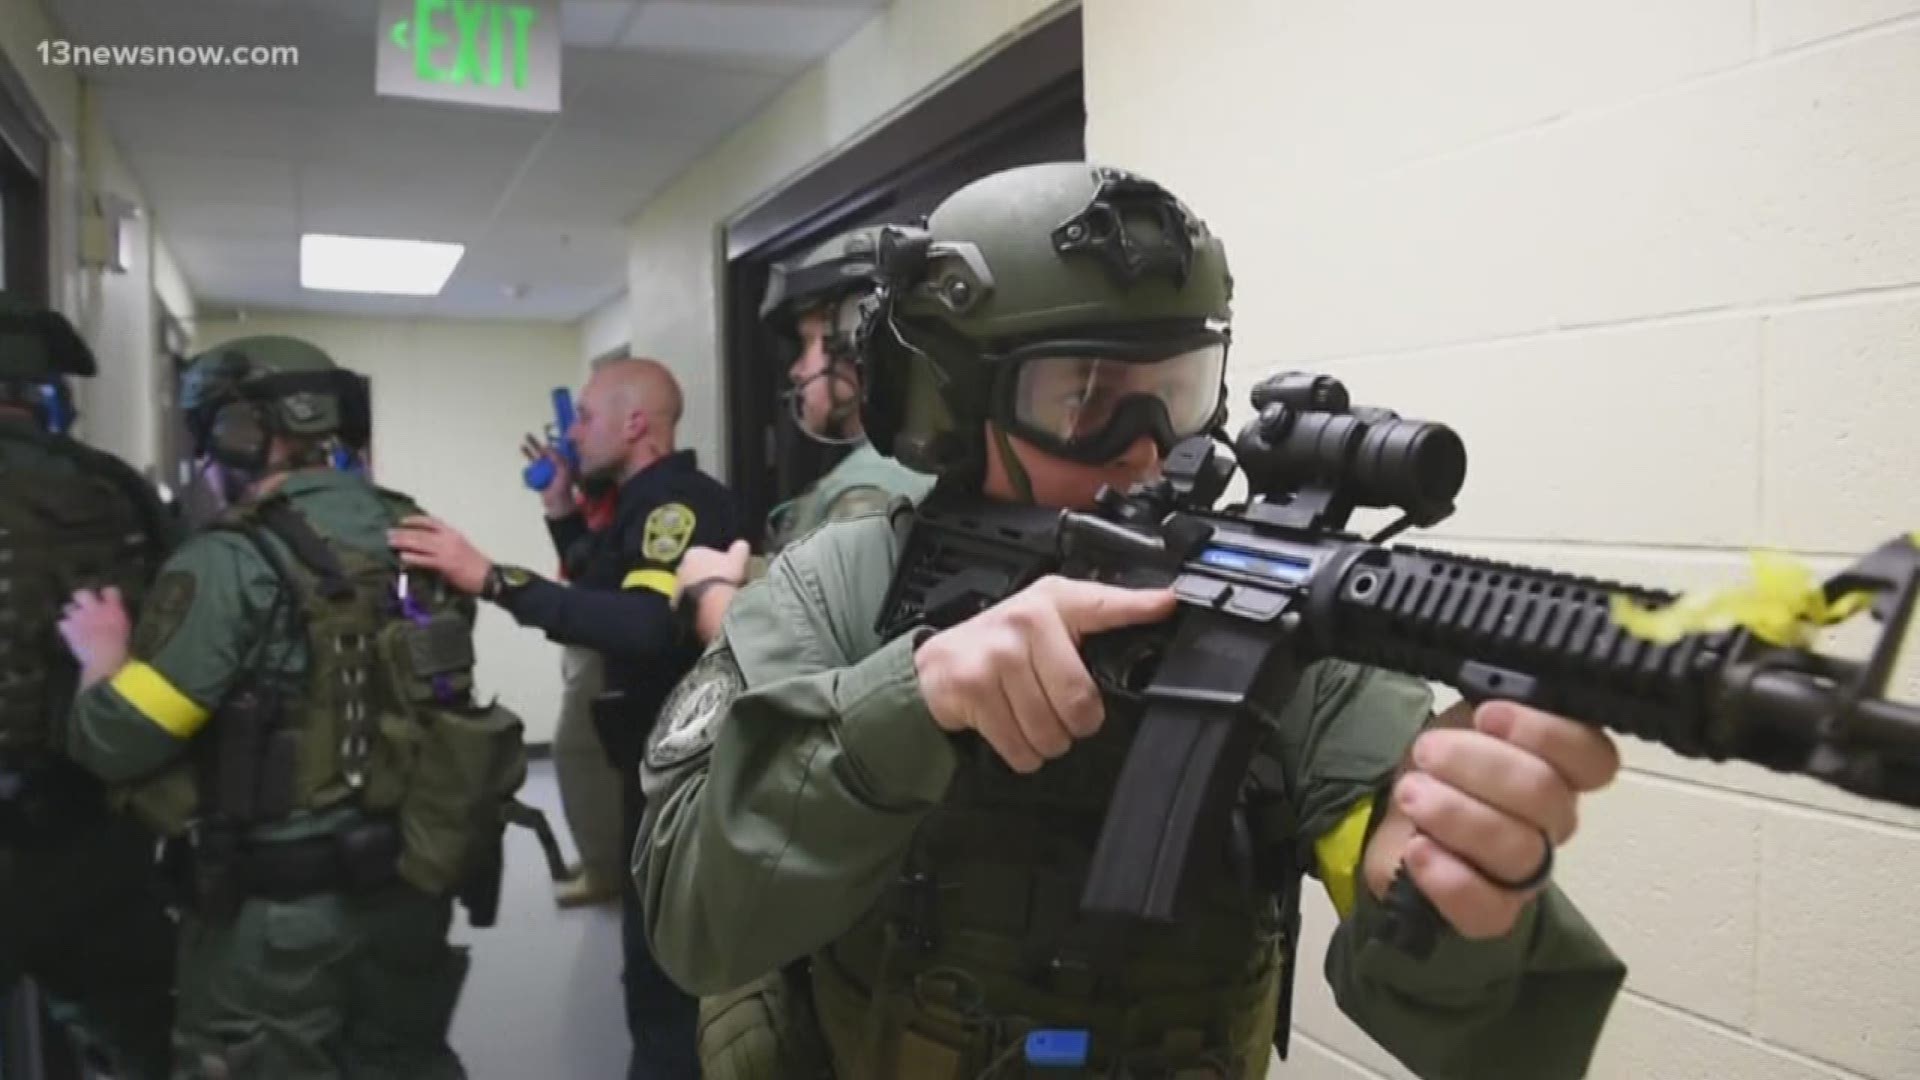 Citadel Shield-Solid Curtain focuses on force protection. That training may have paid off Friday at NAS Oceana when a gunman was subdued within five minutes.